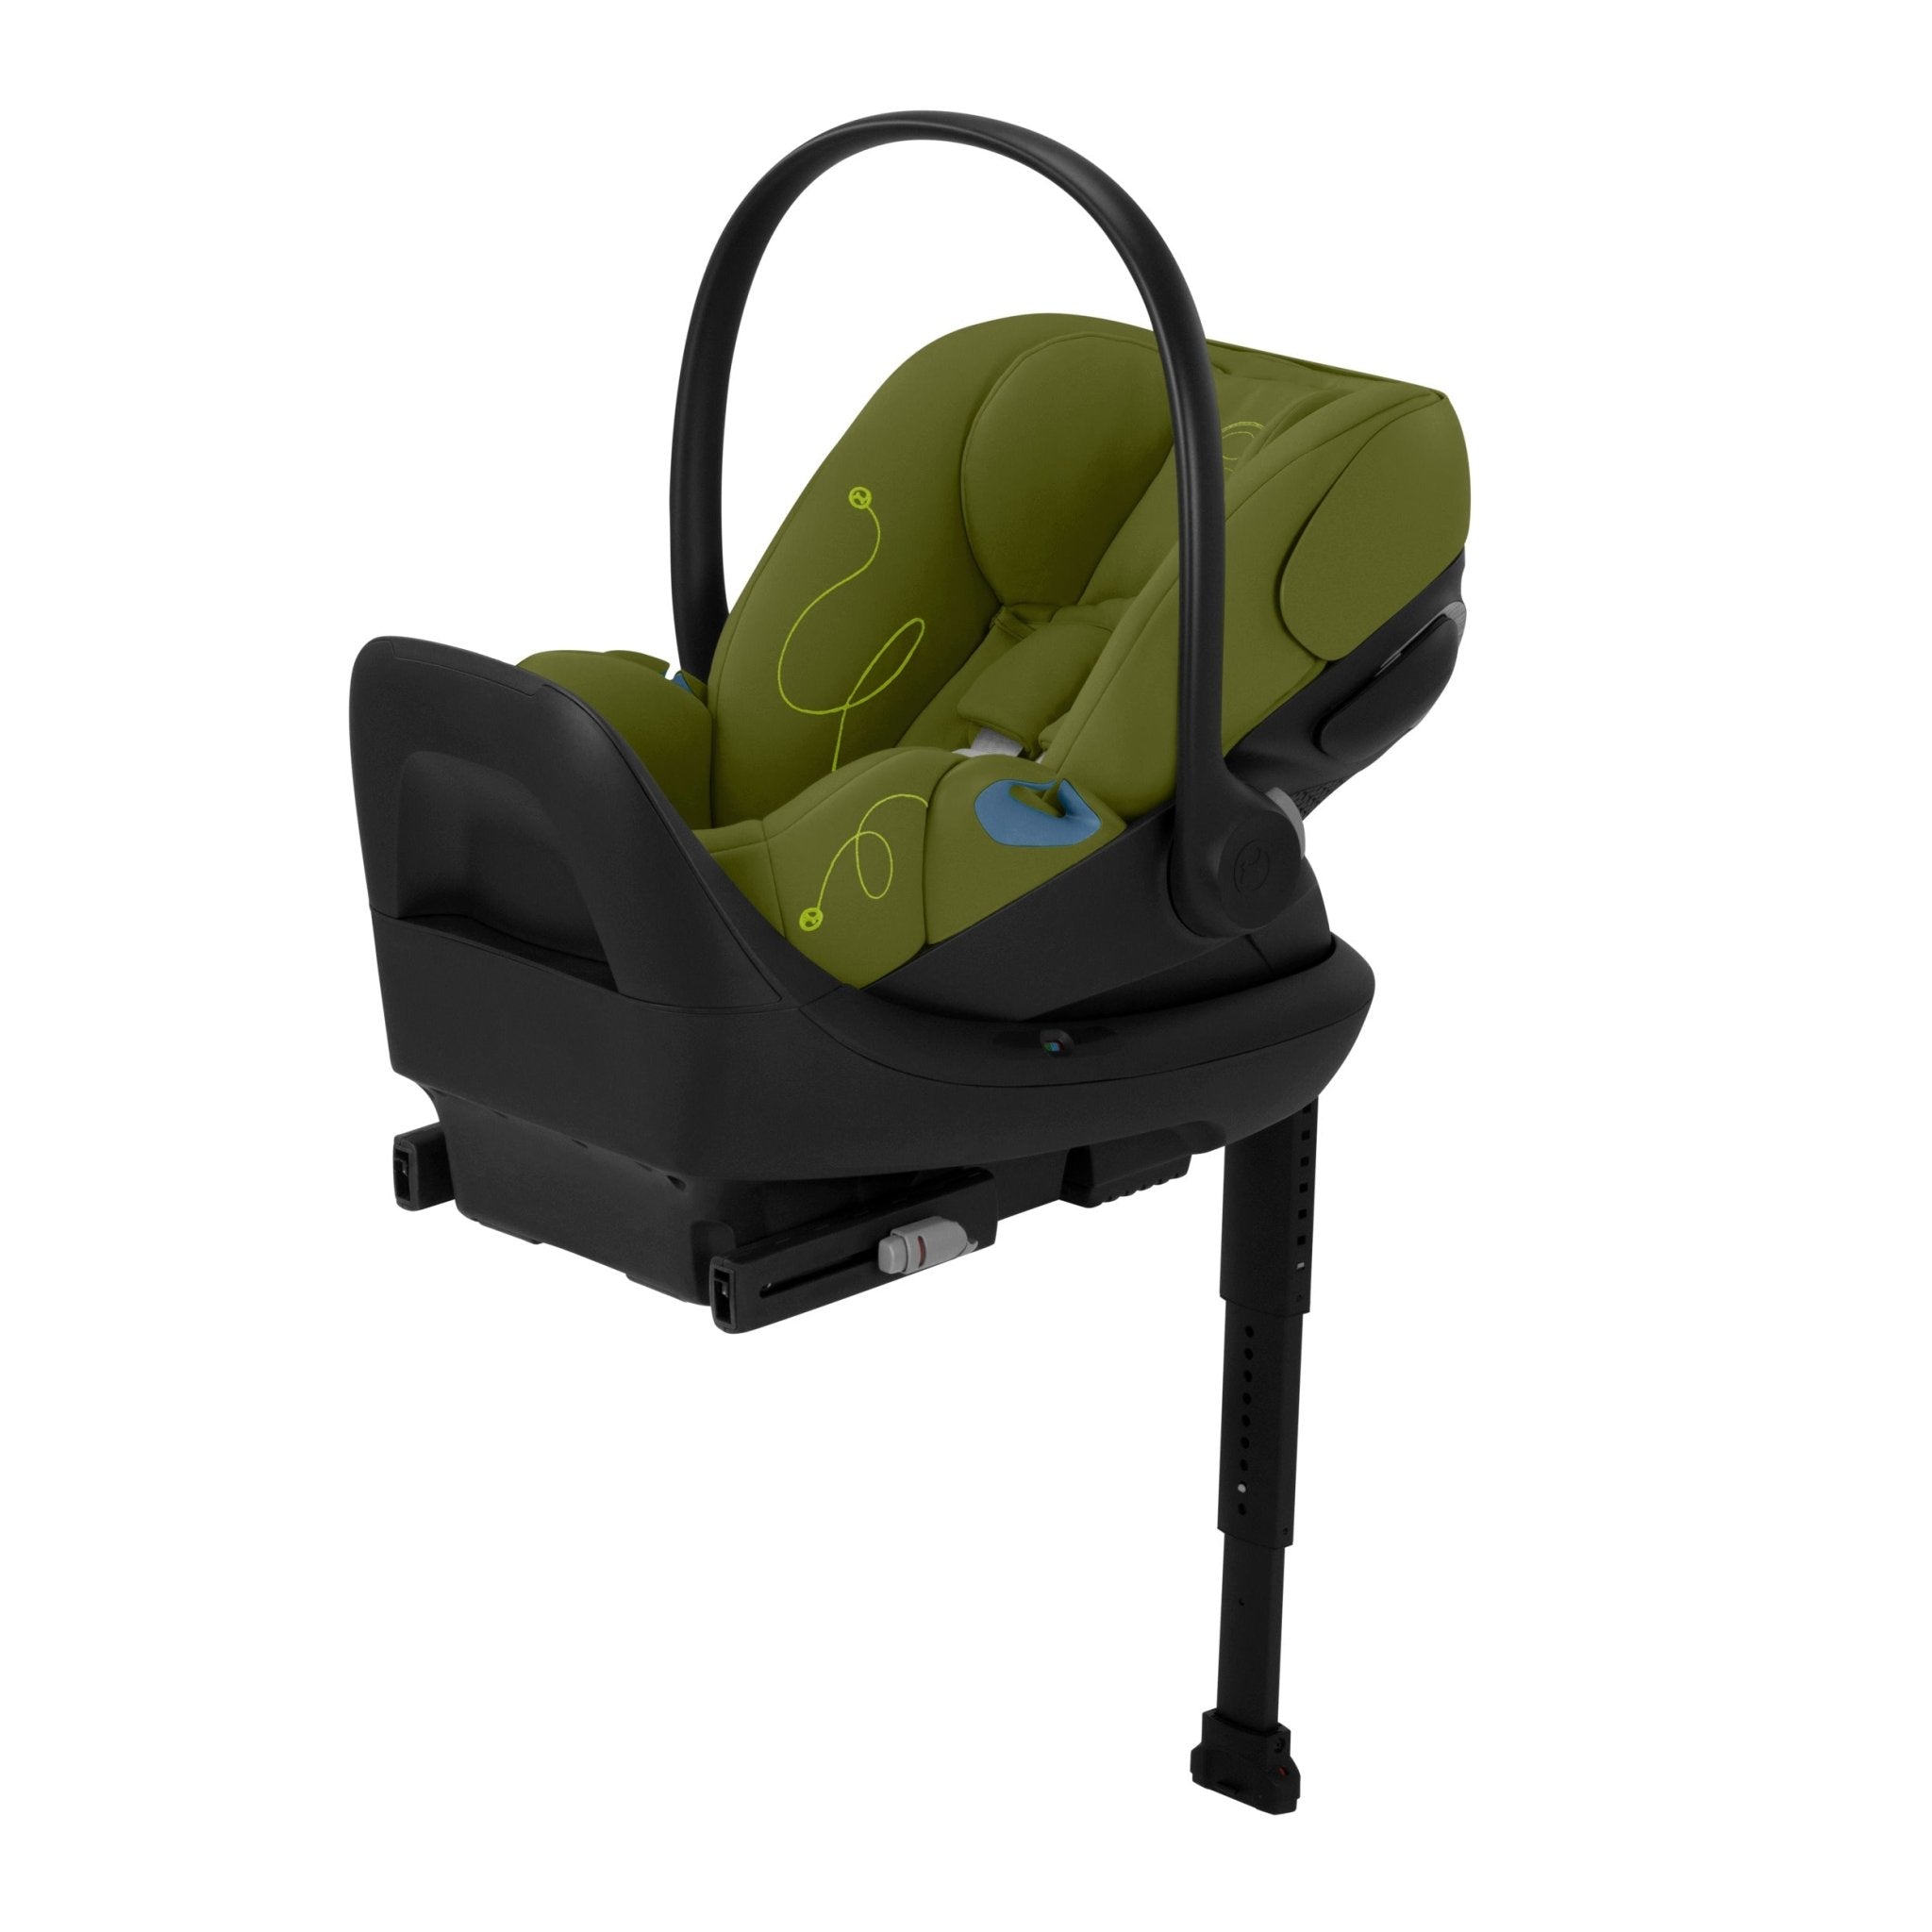 Cybex Cloud G Lux Infant Car Seat - ANB Baby -4063846282722$300 - $500